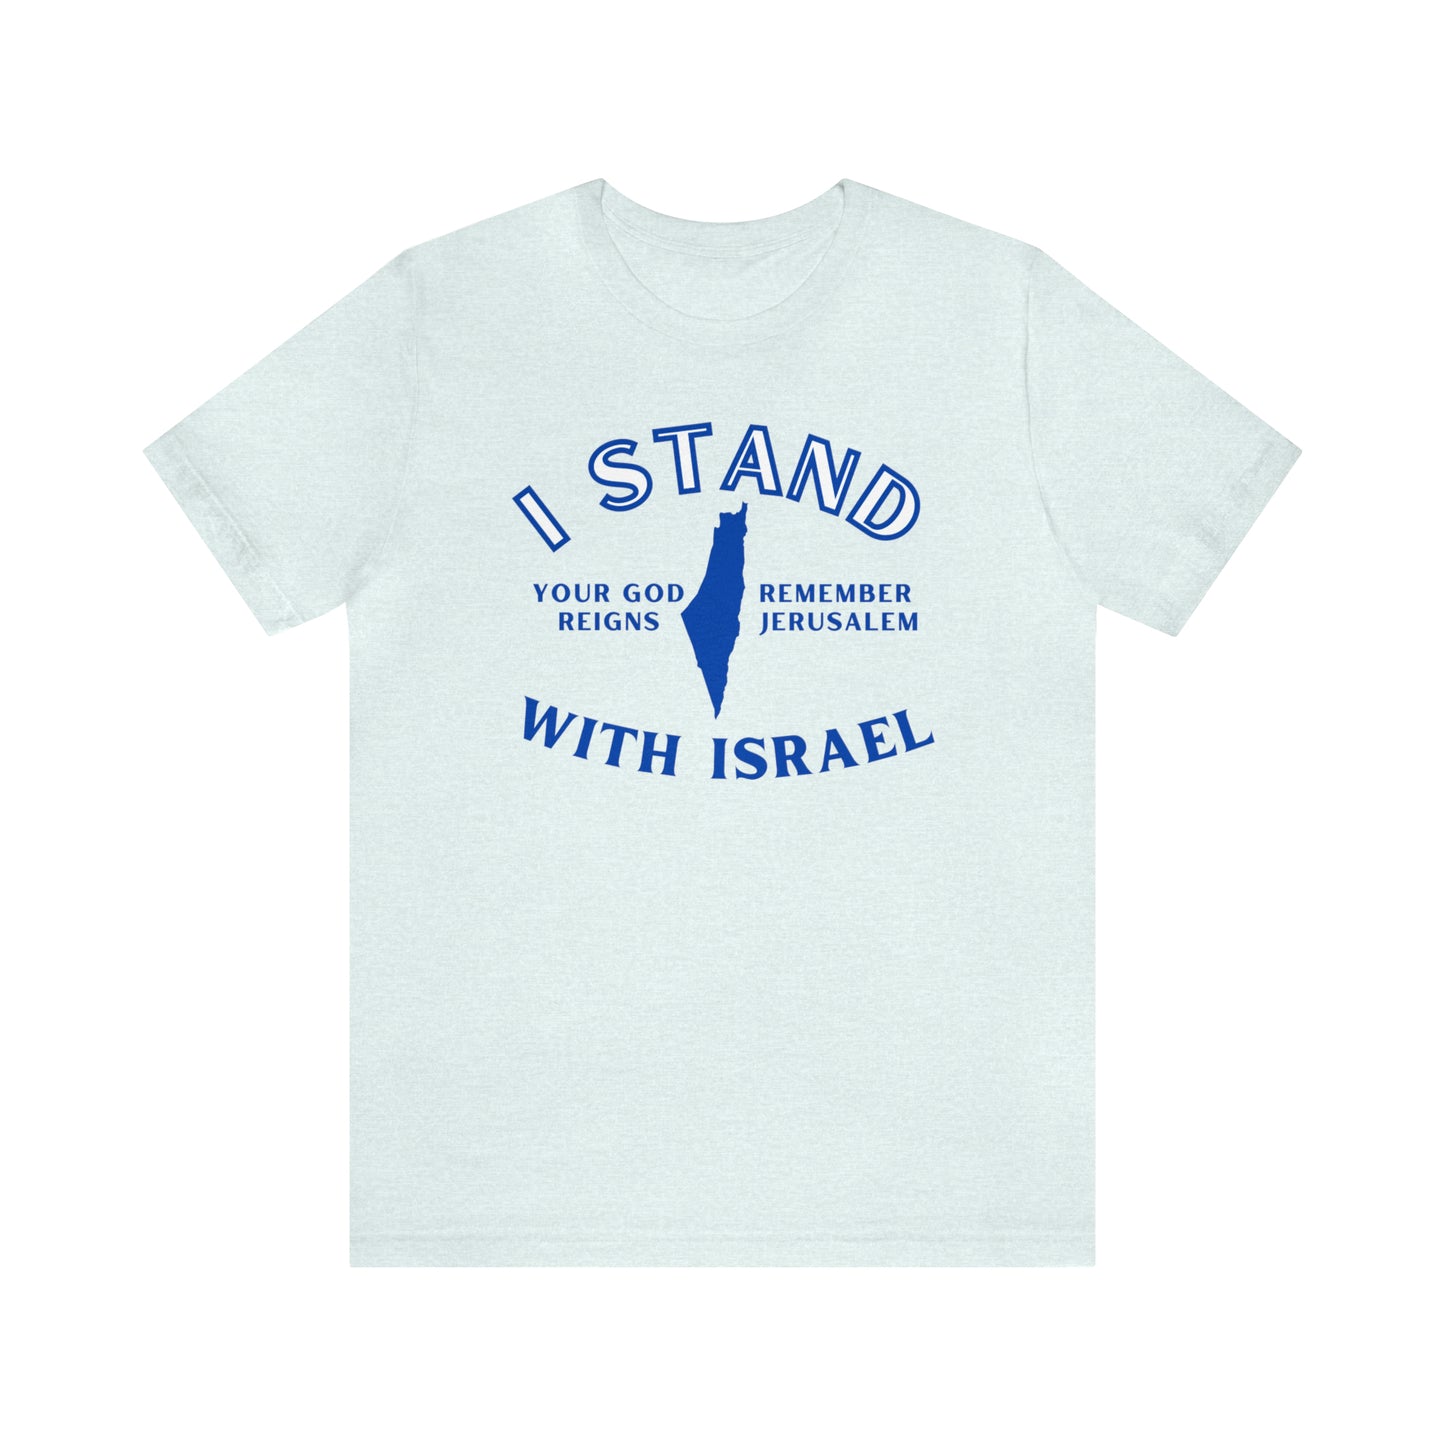 I Stand With Israel (Green Pastures Apparel)